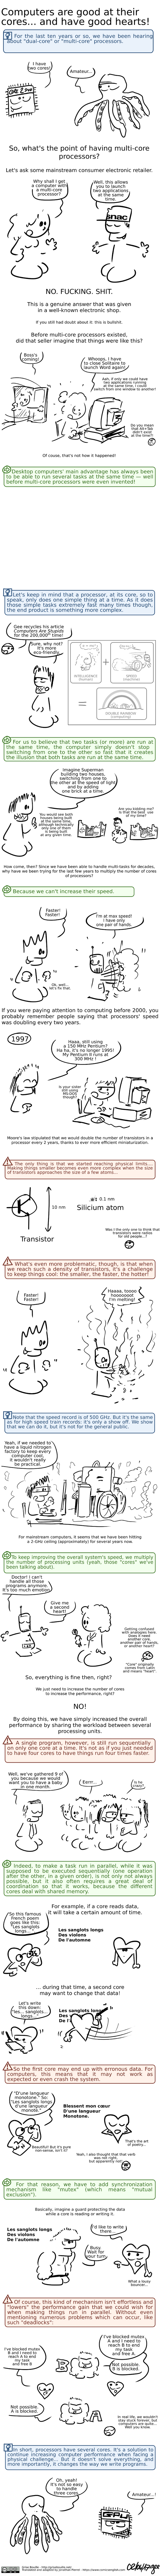 comic explaining how cores function in computers